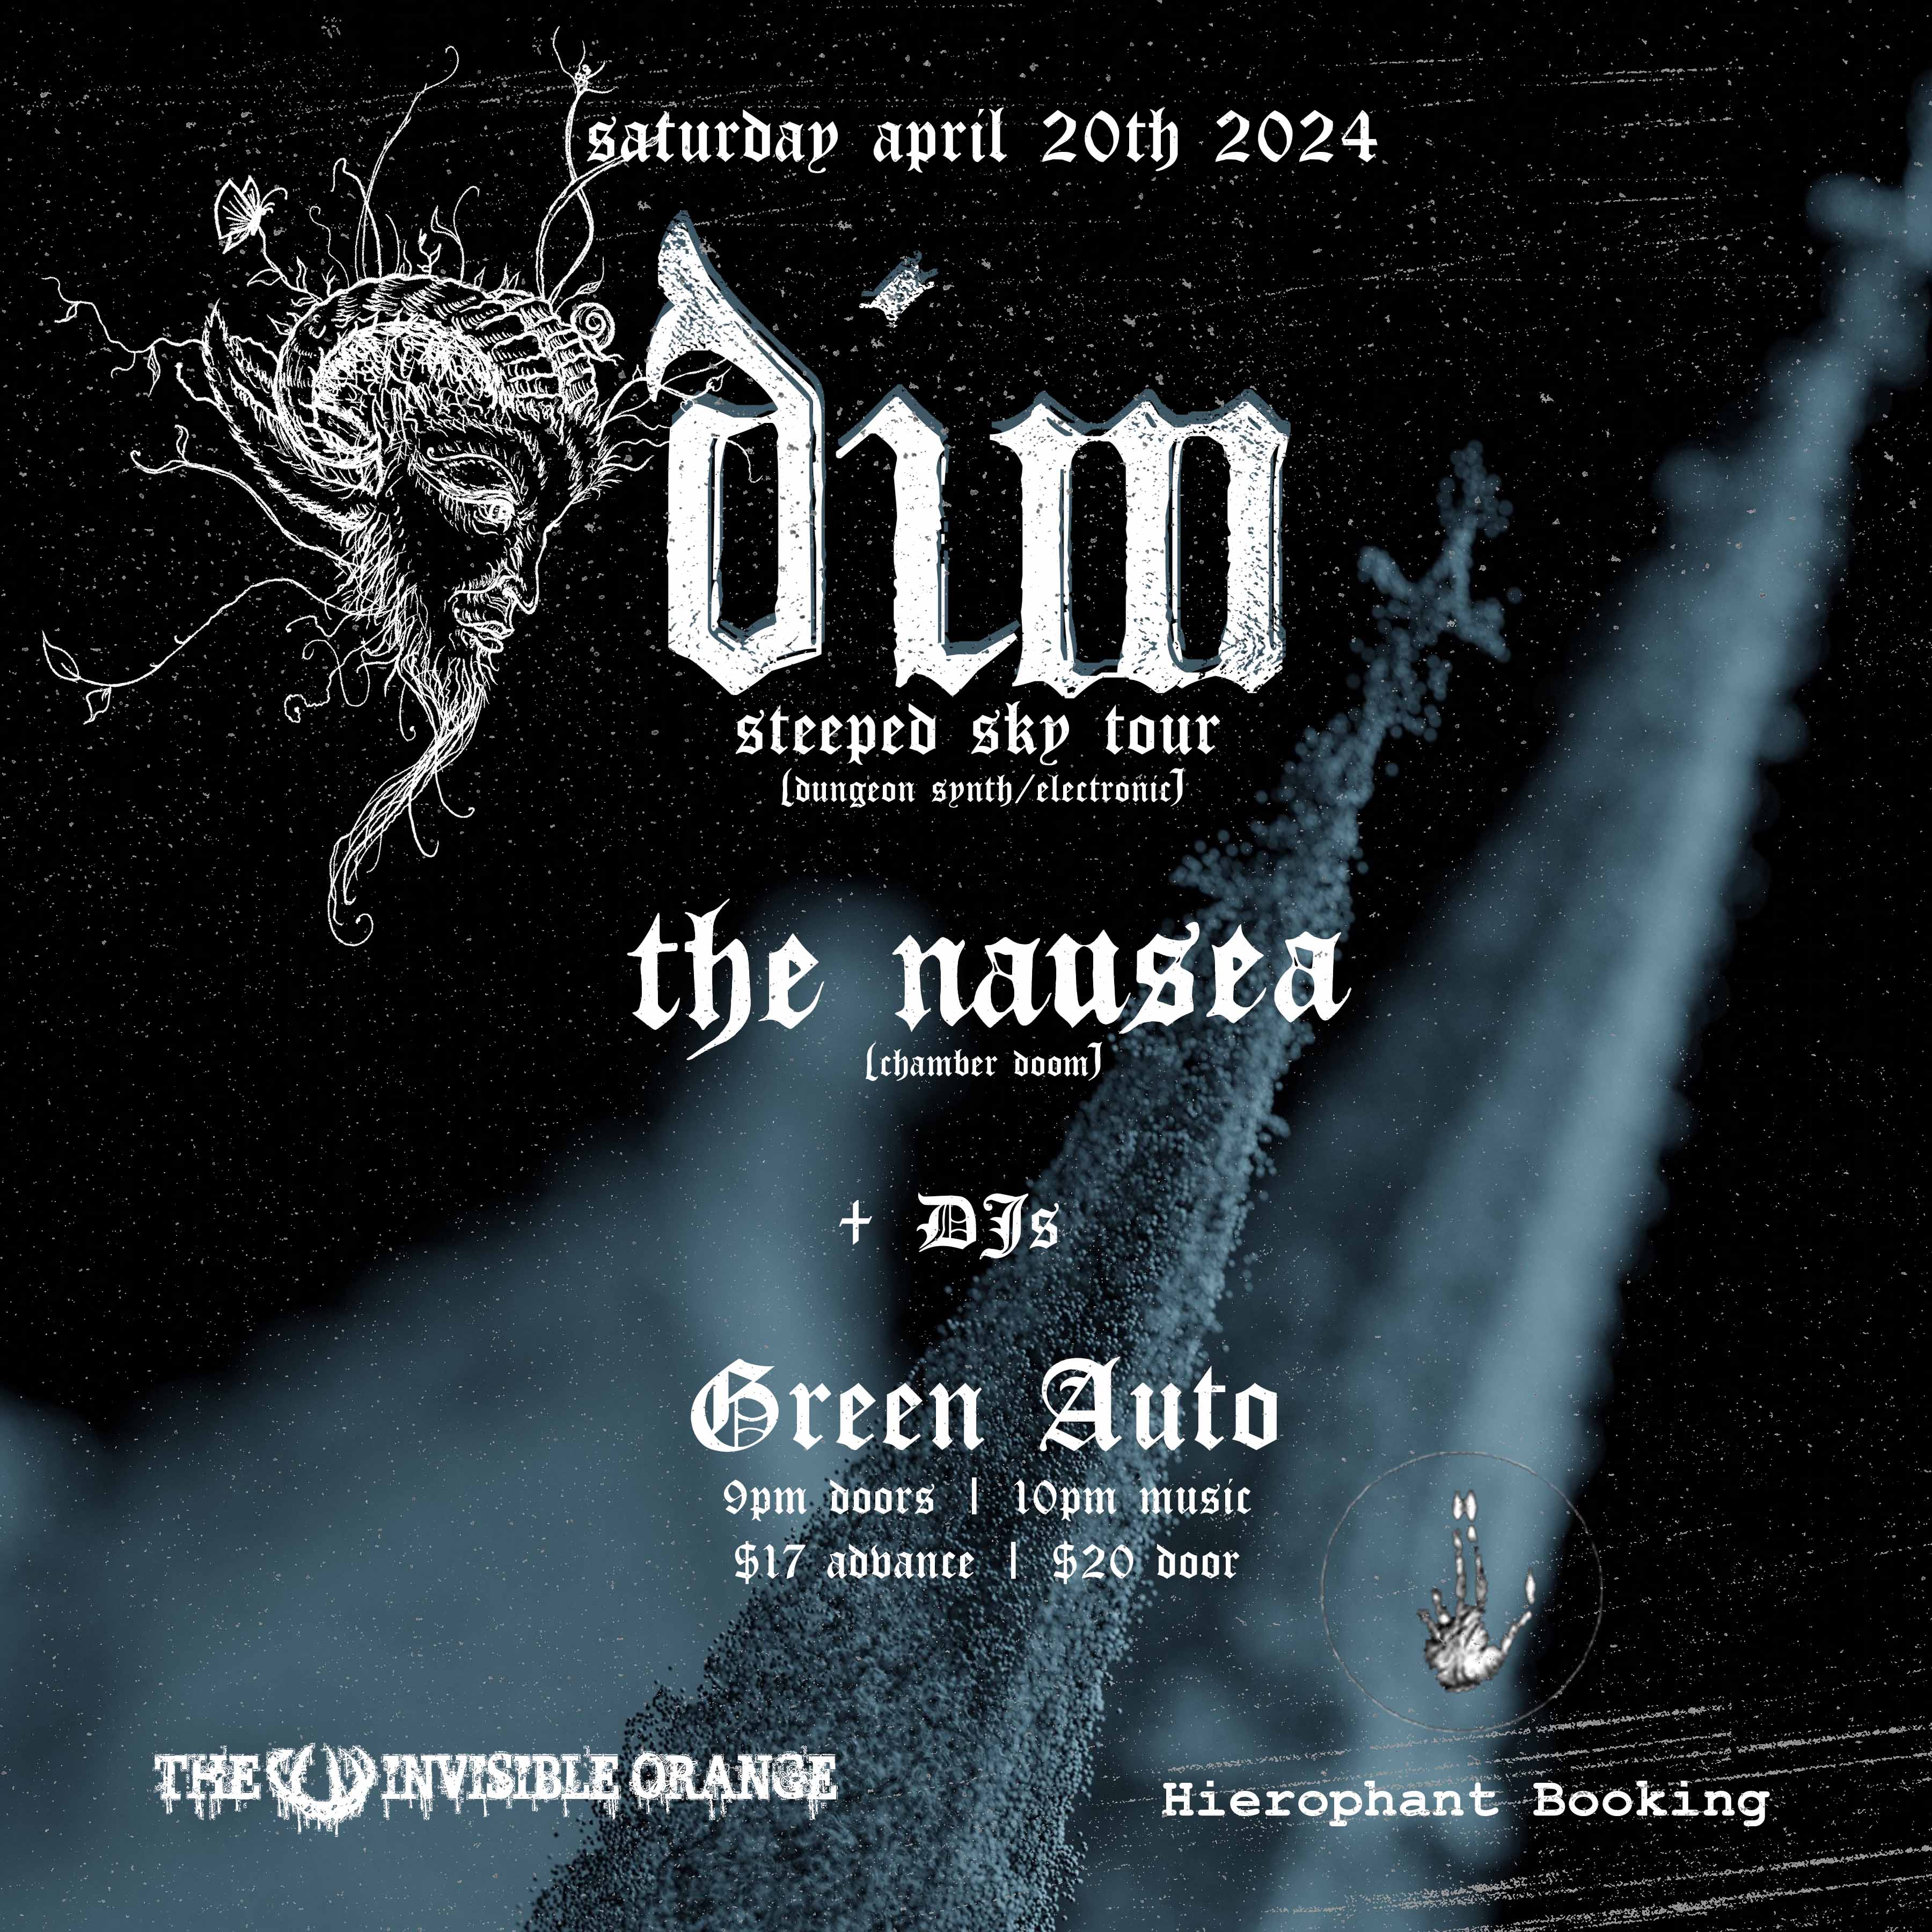 (CANCELLED) DIM, The Nausea, and DJs